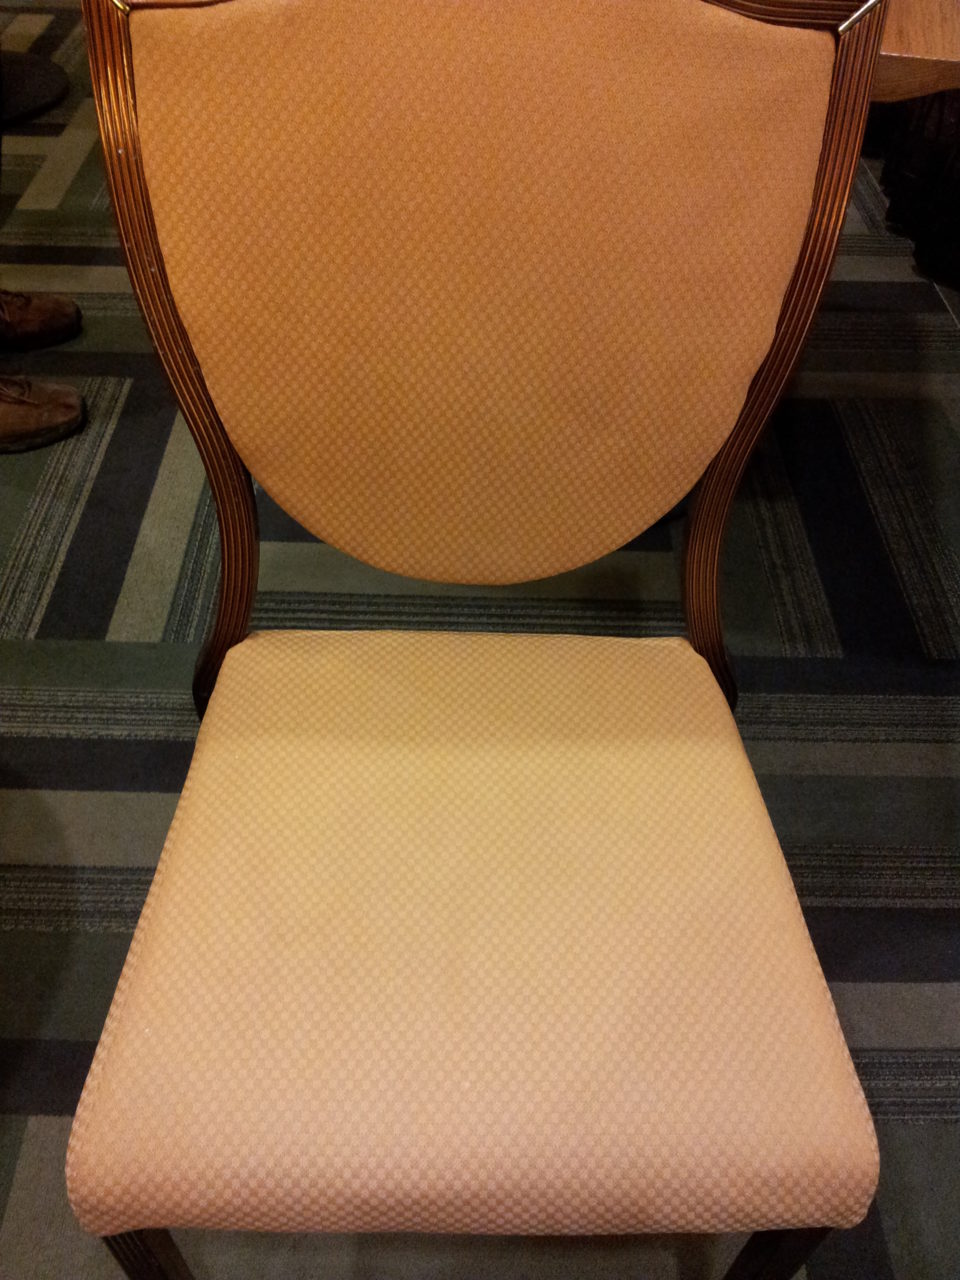 Seat Before & after photos